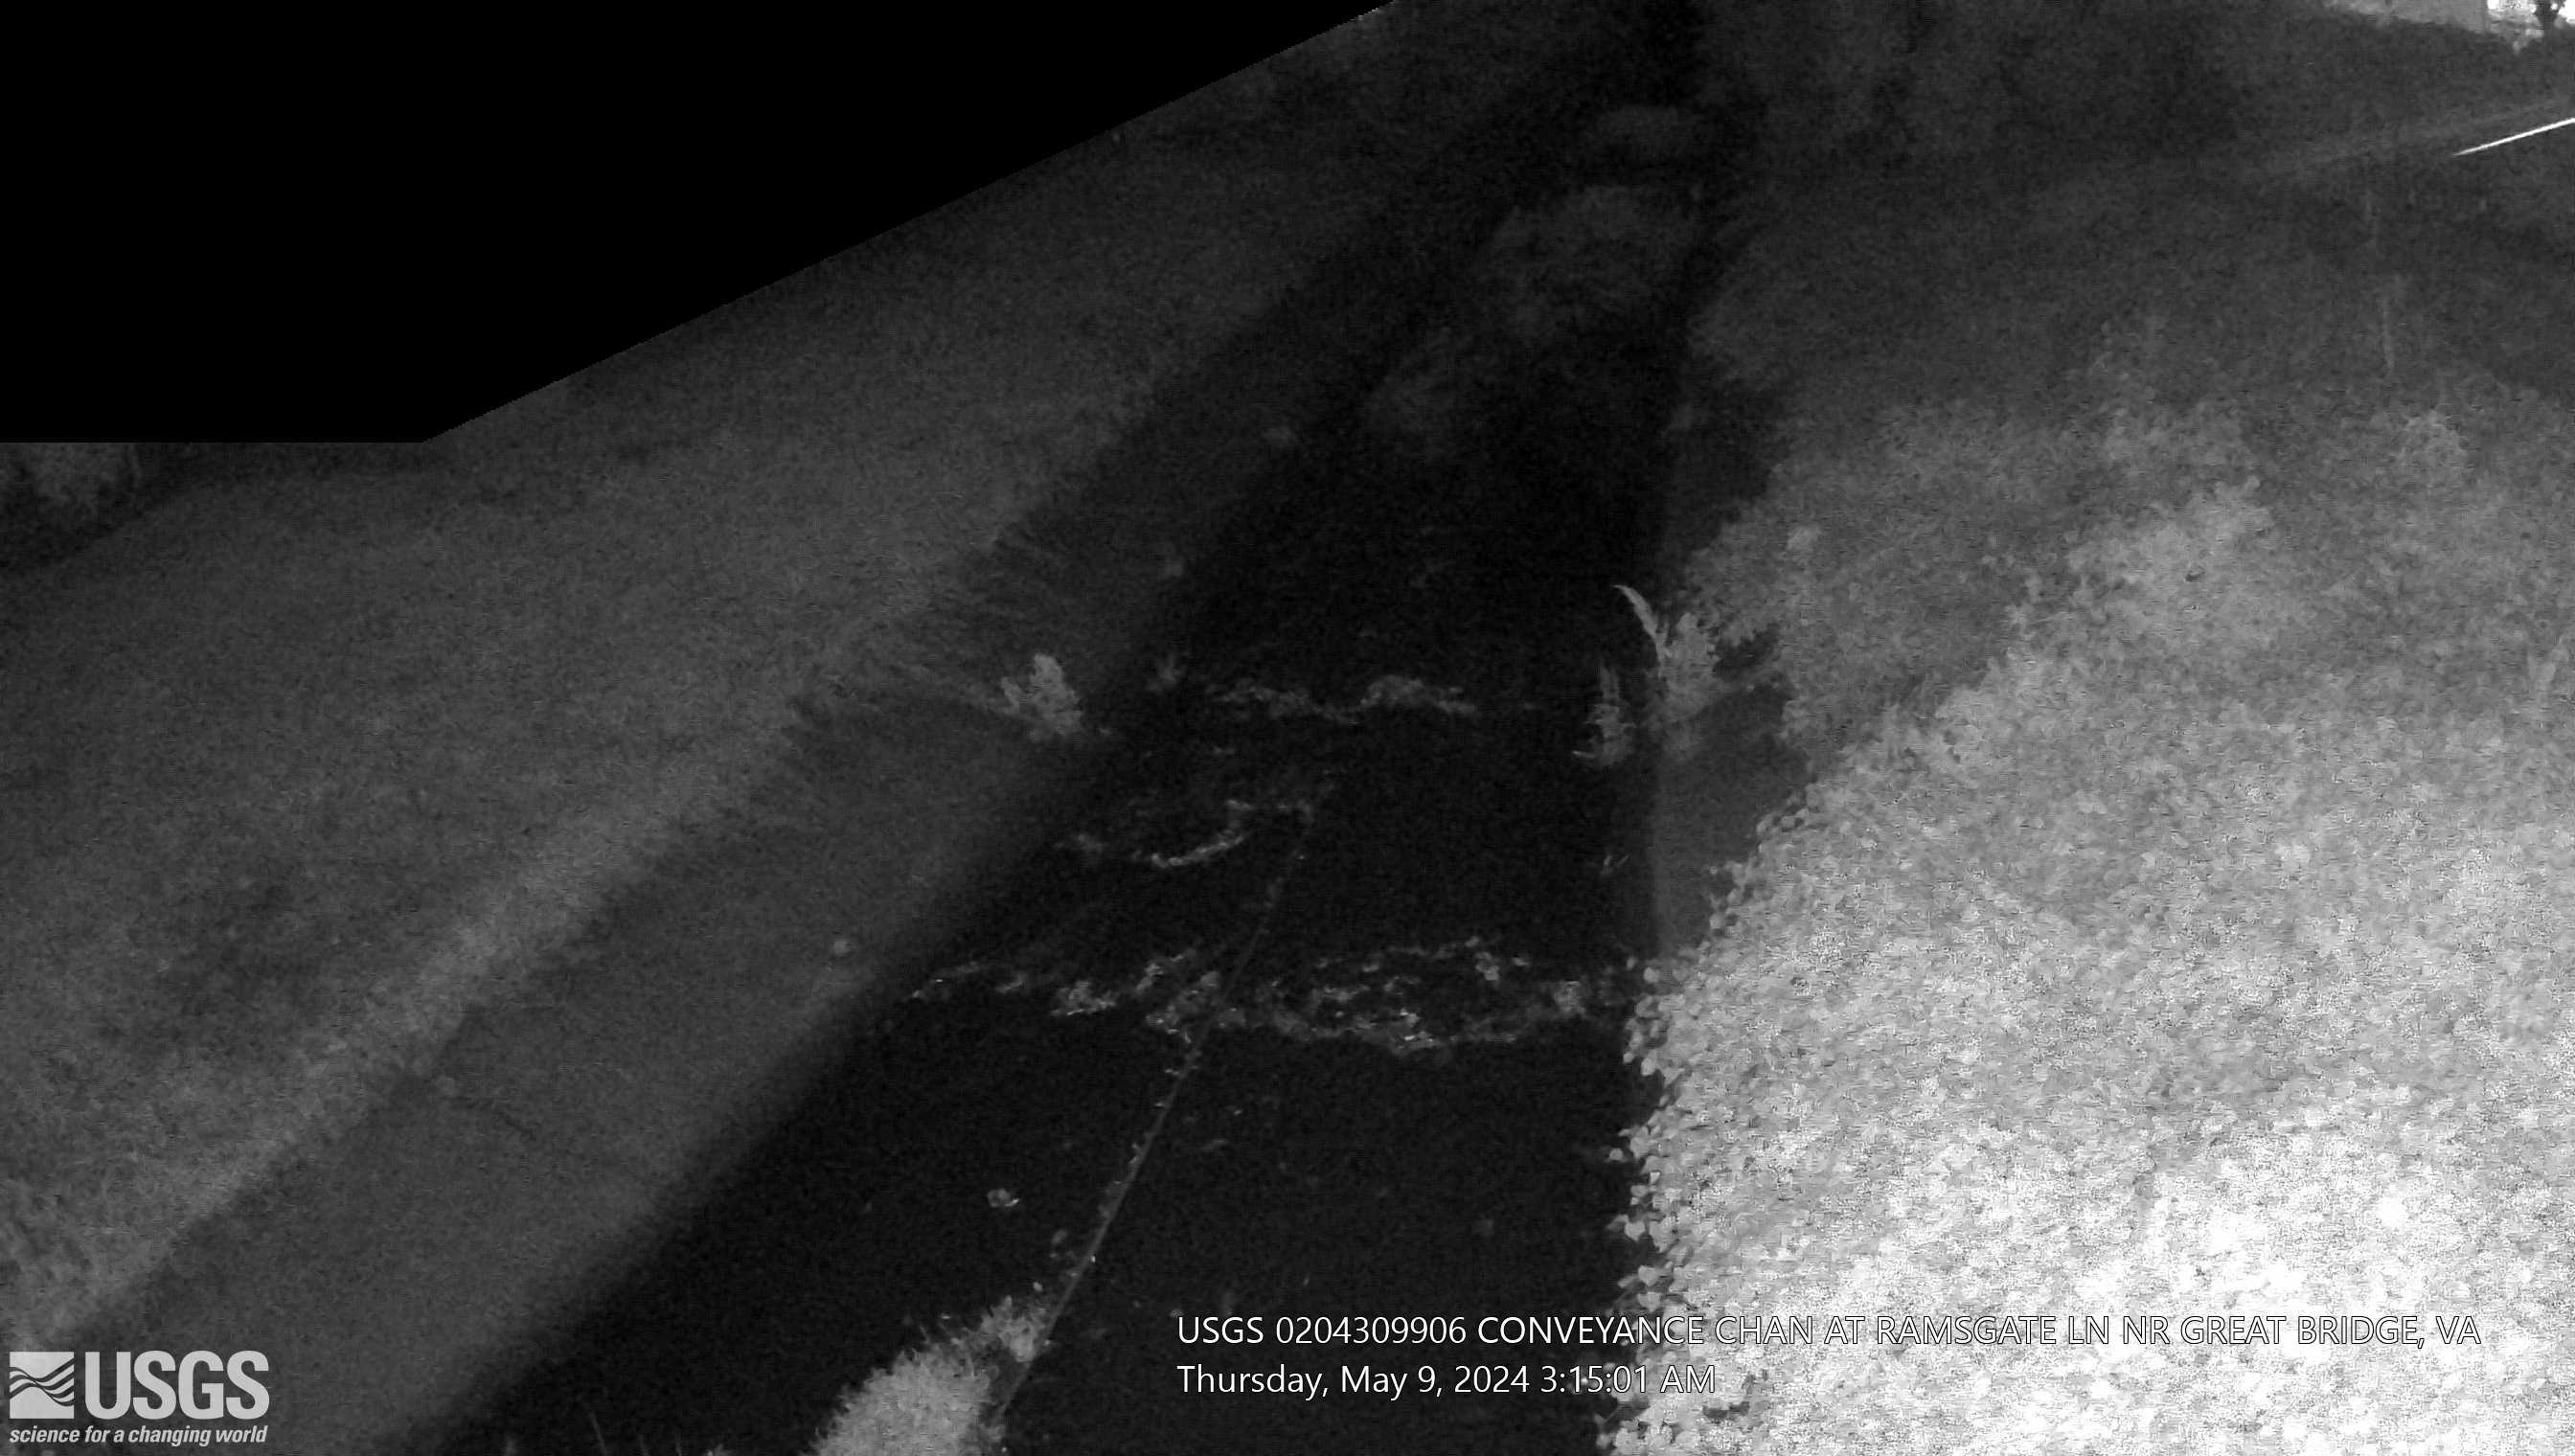 Most recent imagery from the conveyance chain at Ramsgate